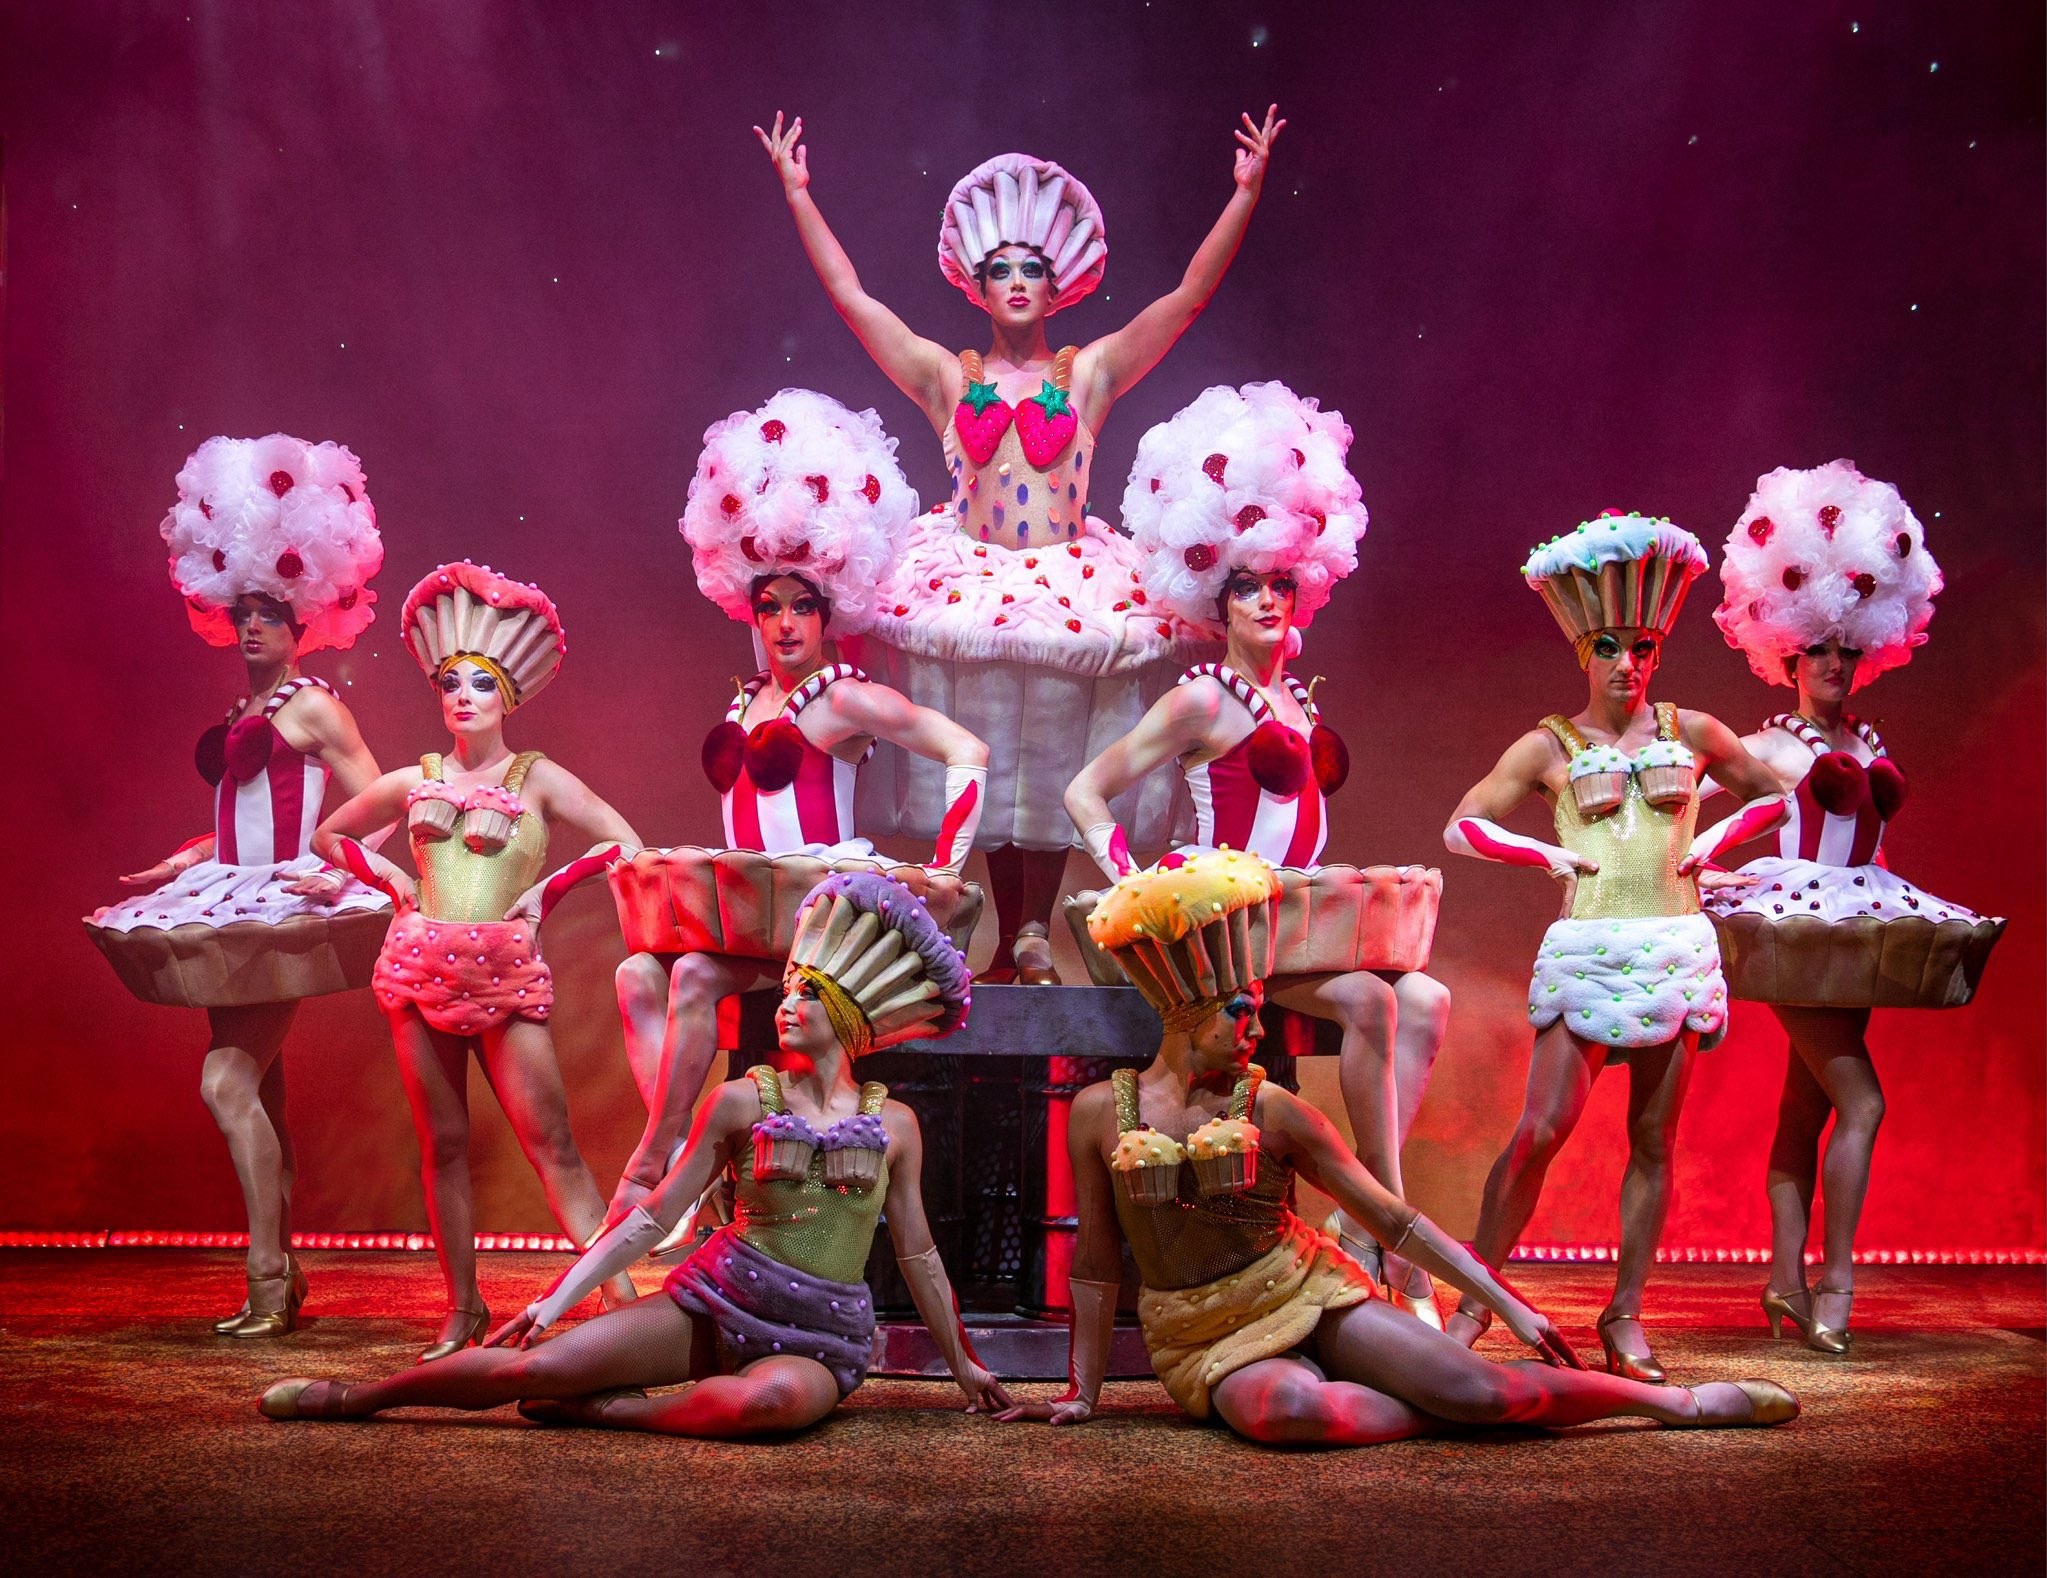 A picture of Priscilla Queen of the Desert, the musical